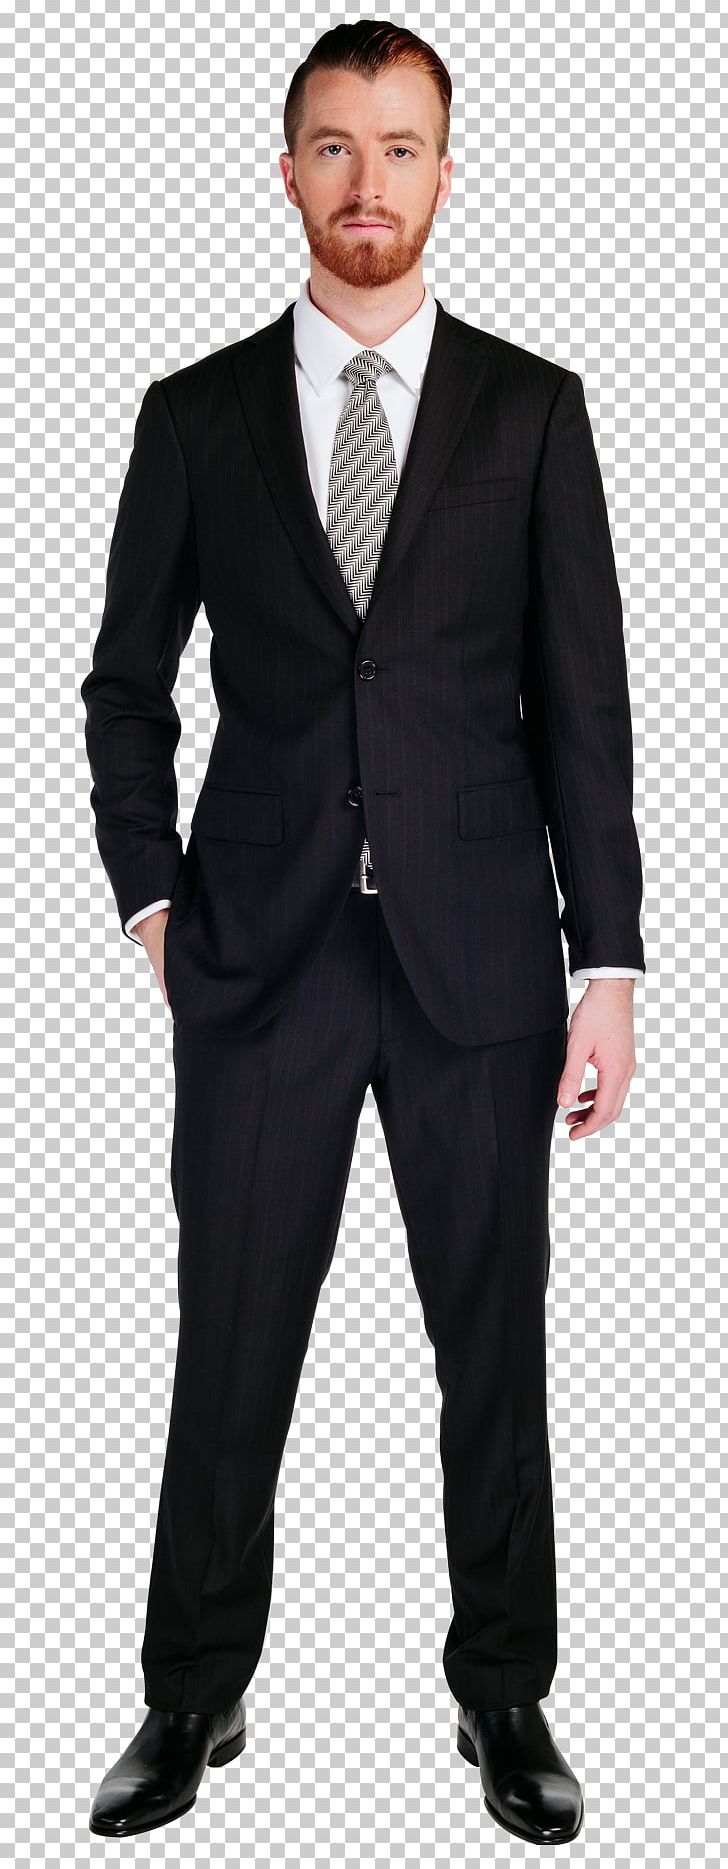 Suit Formal Wear Tuxedo Sport Coat Outerwear PNG, Clipart, Blazer, Business, Business Executive, Businessperson, Casual Free PNG Download